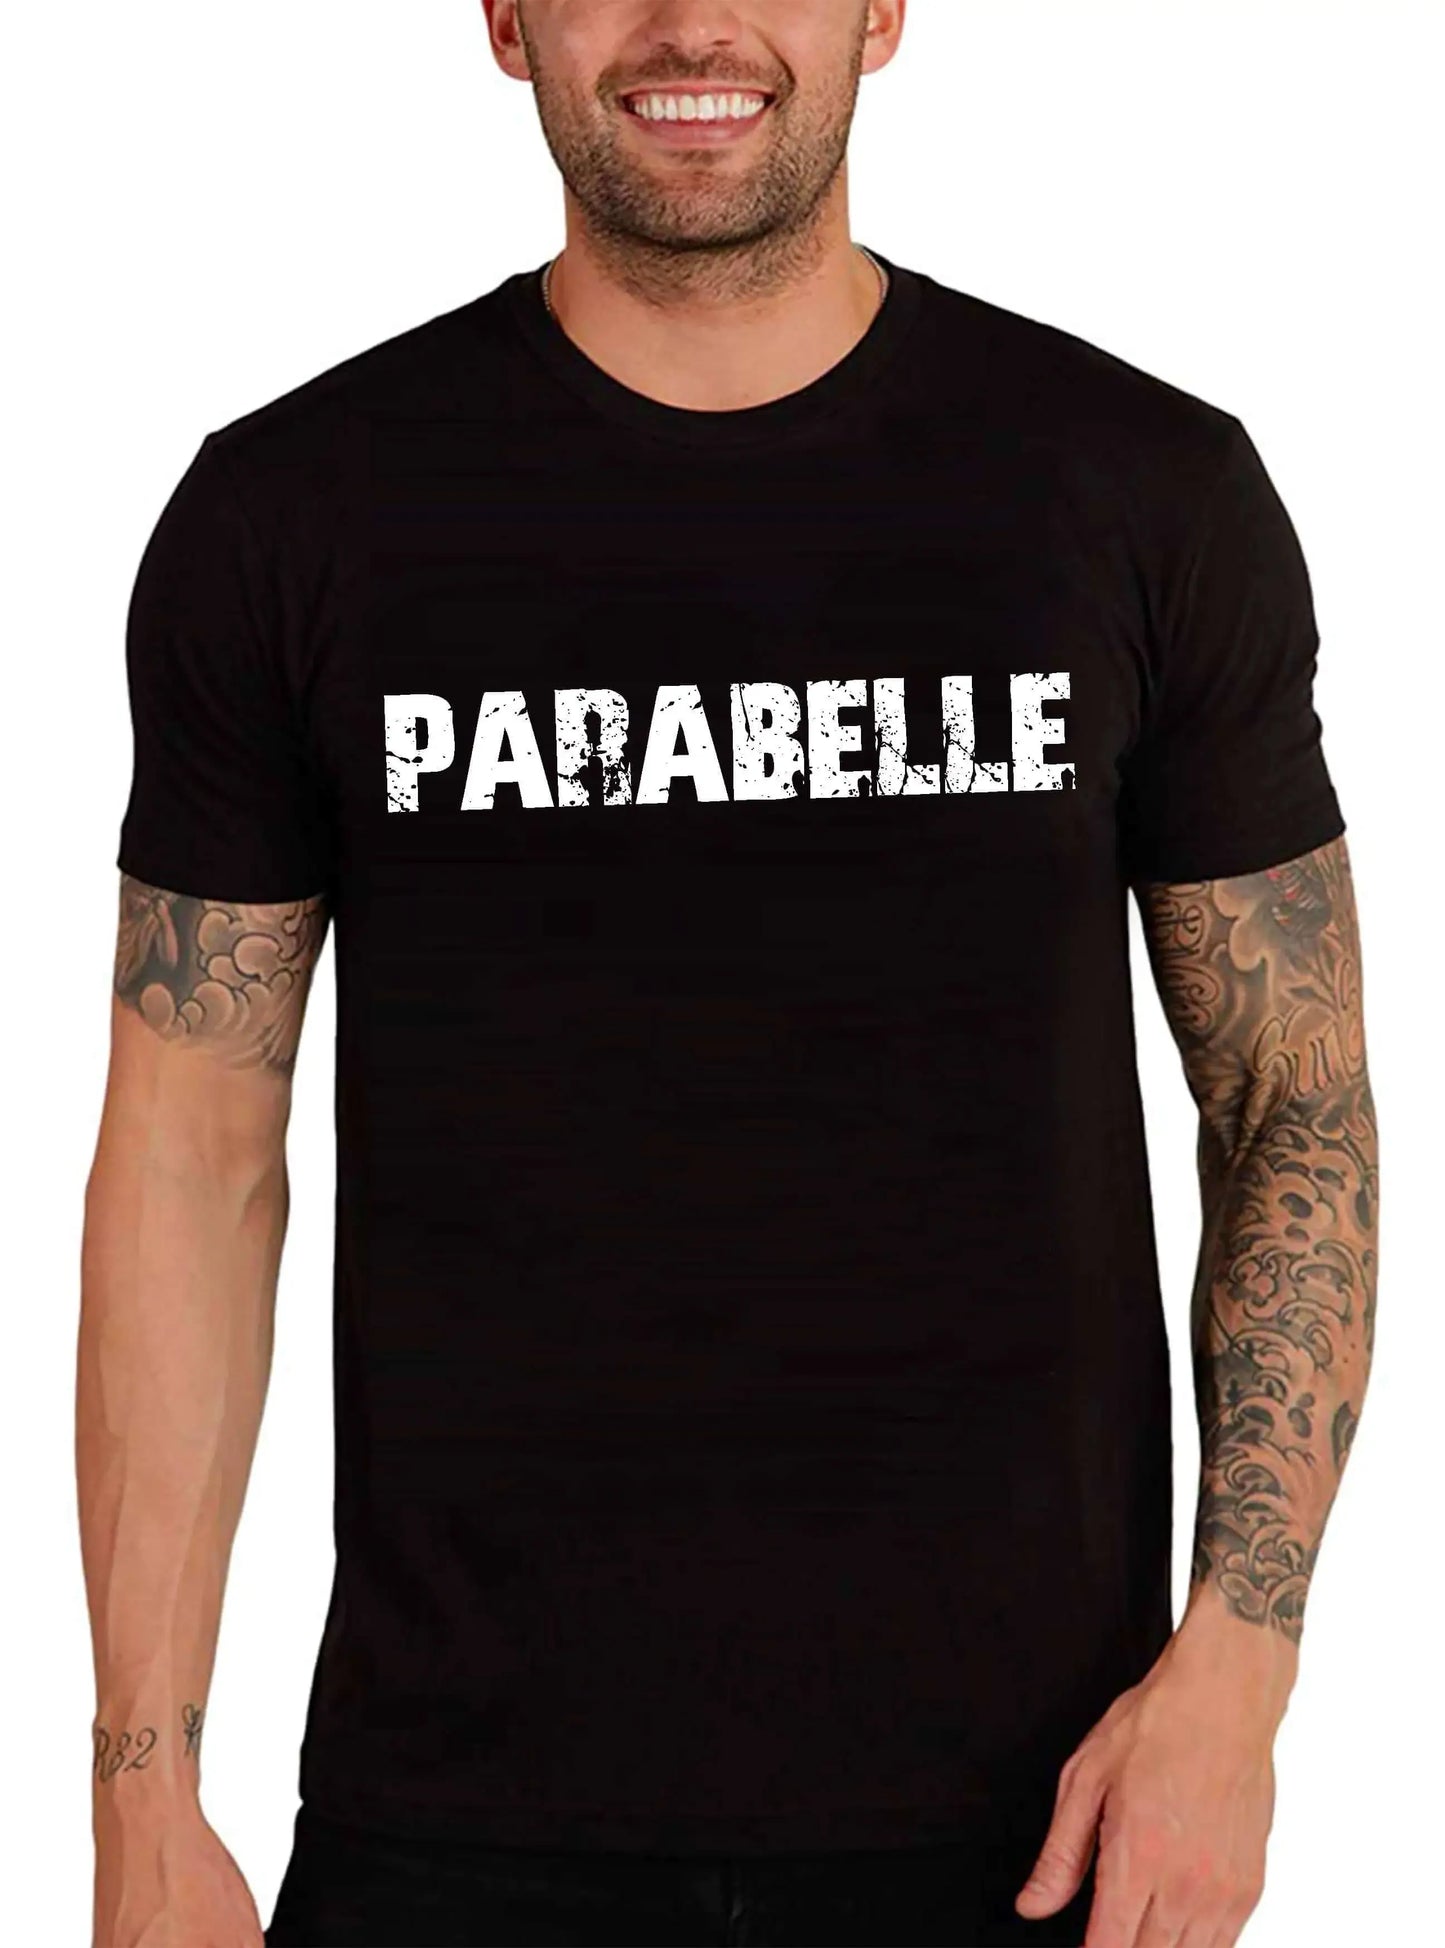 Men's Graphic T-Shirt Parabelle Eco-Friendly Limited Edition Short Sleeve Tee-Shirt Vintage Birthday Gift Novelty